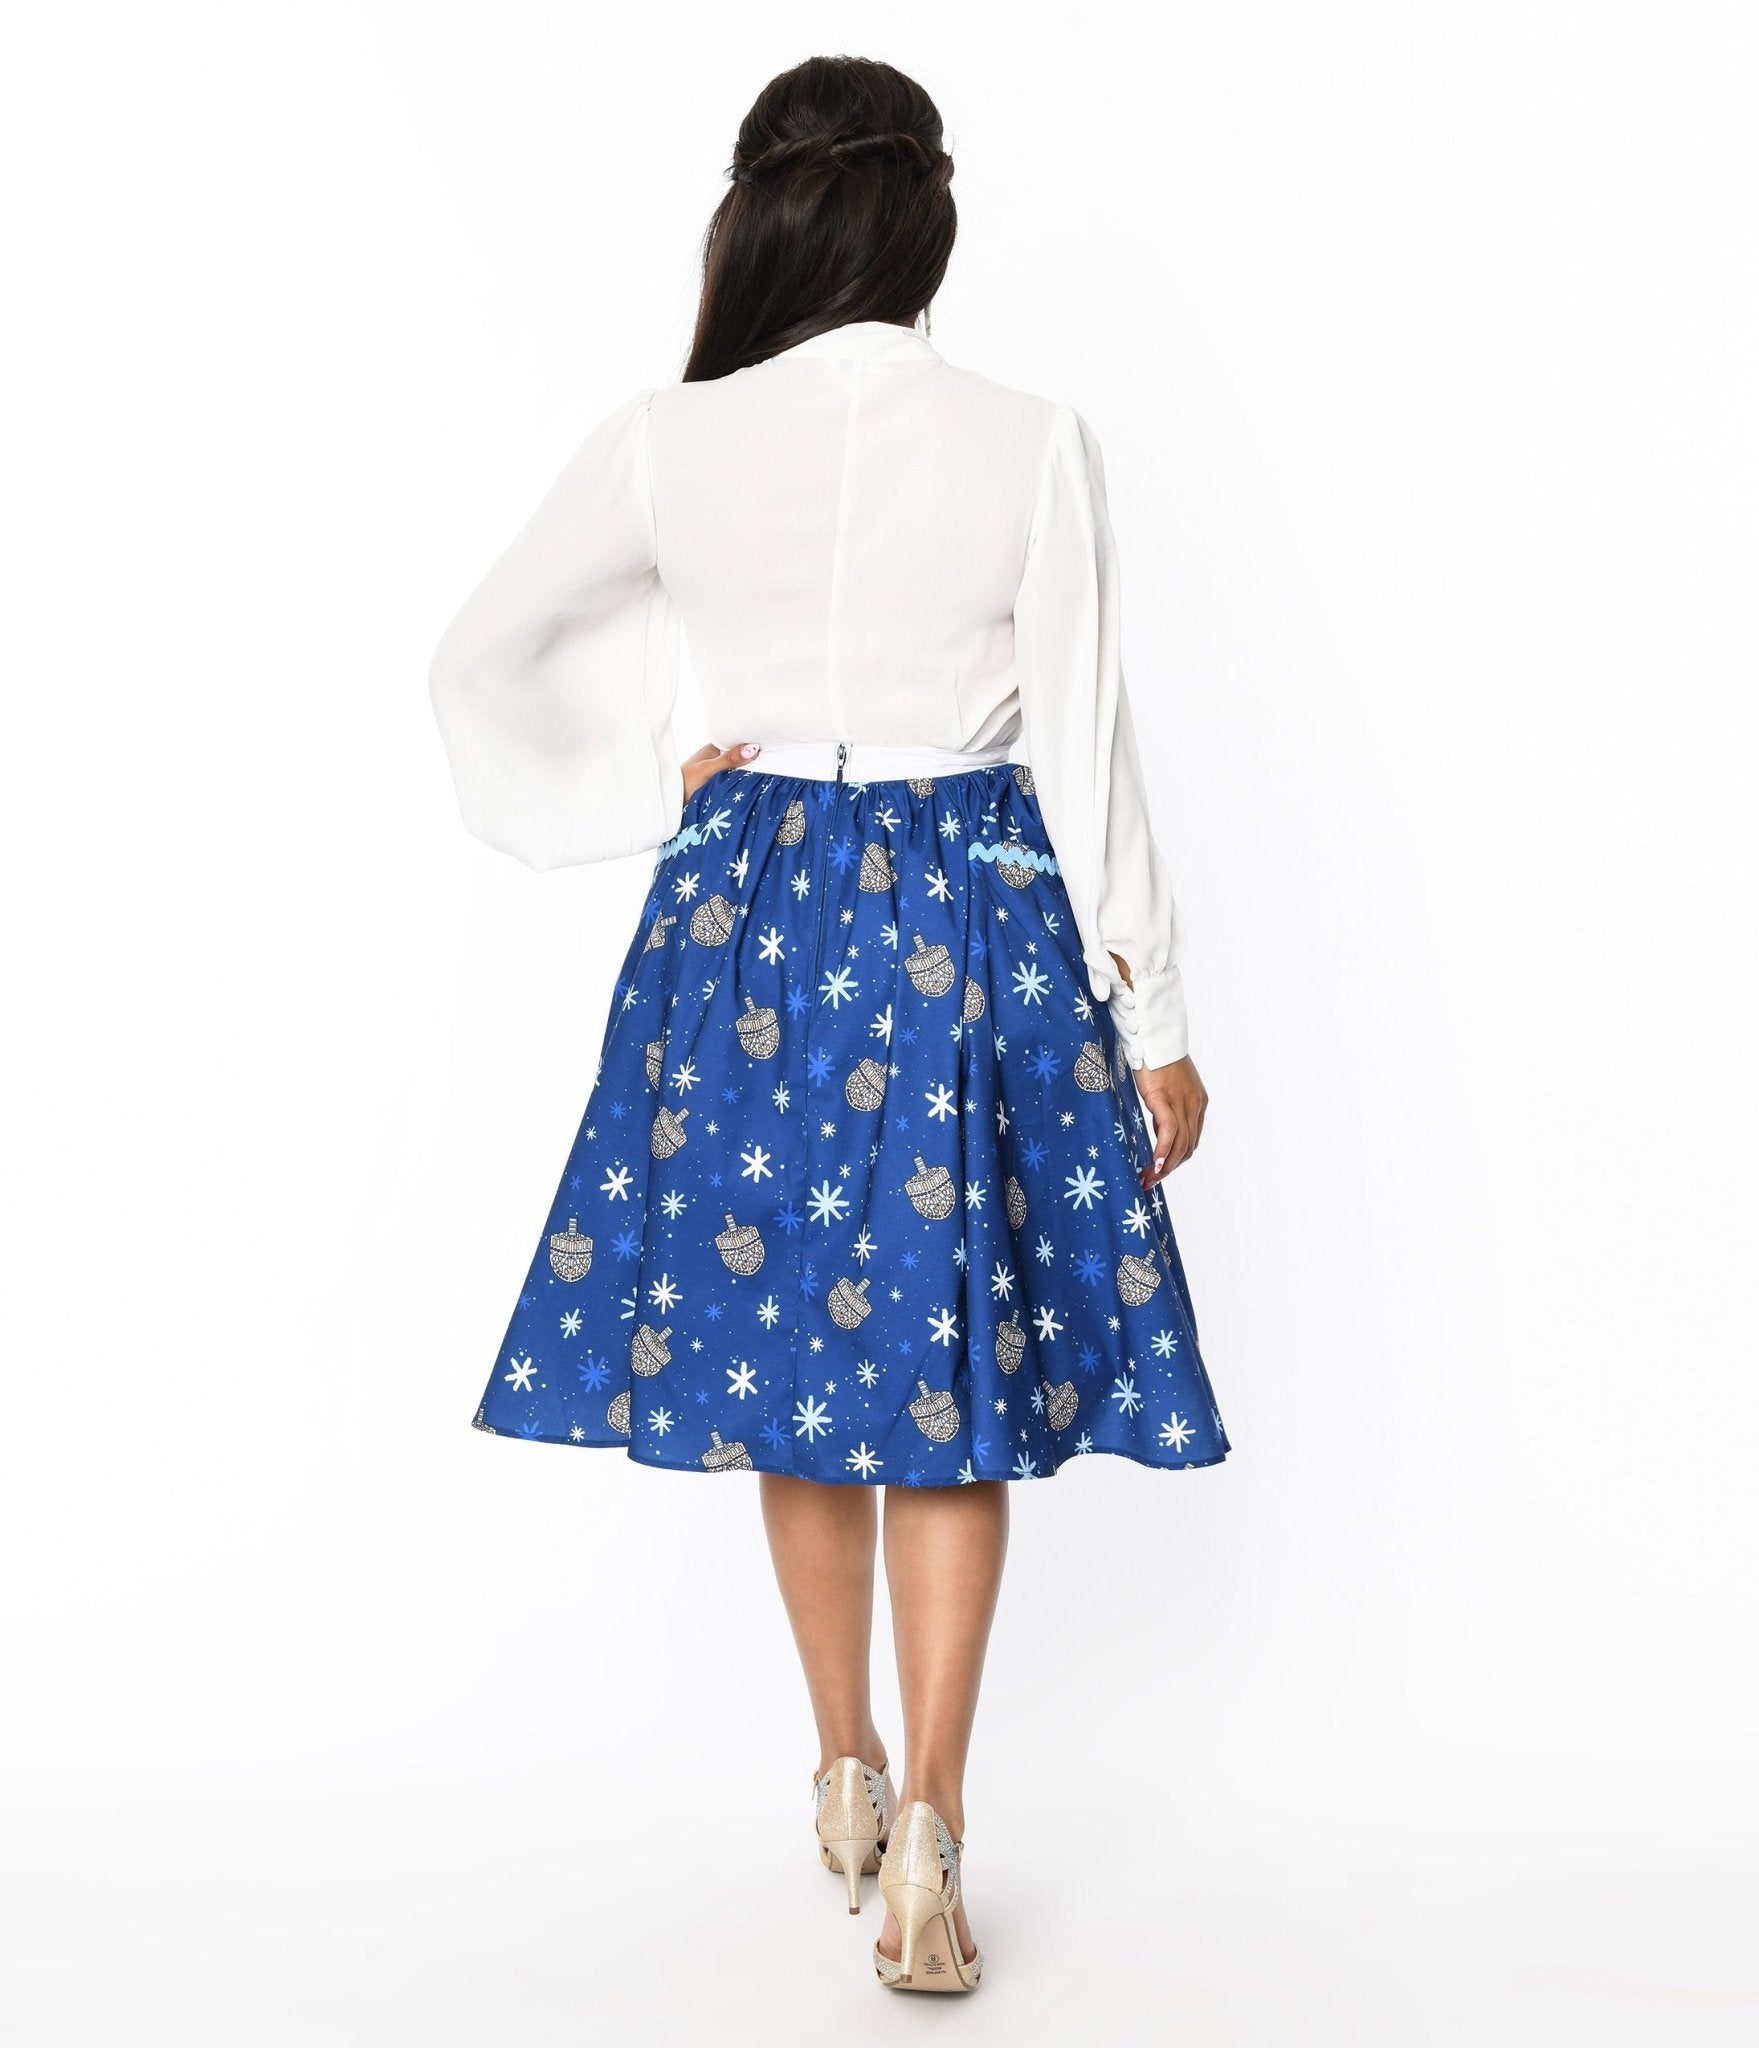 Guide About: What is the Best Fabric to Make a Skirt?